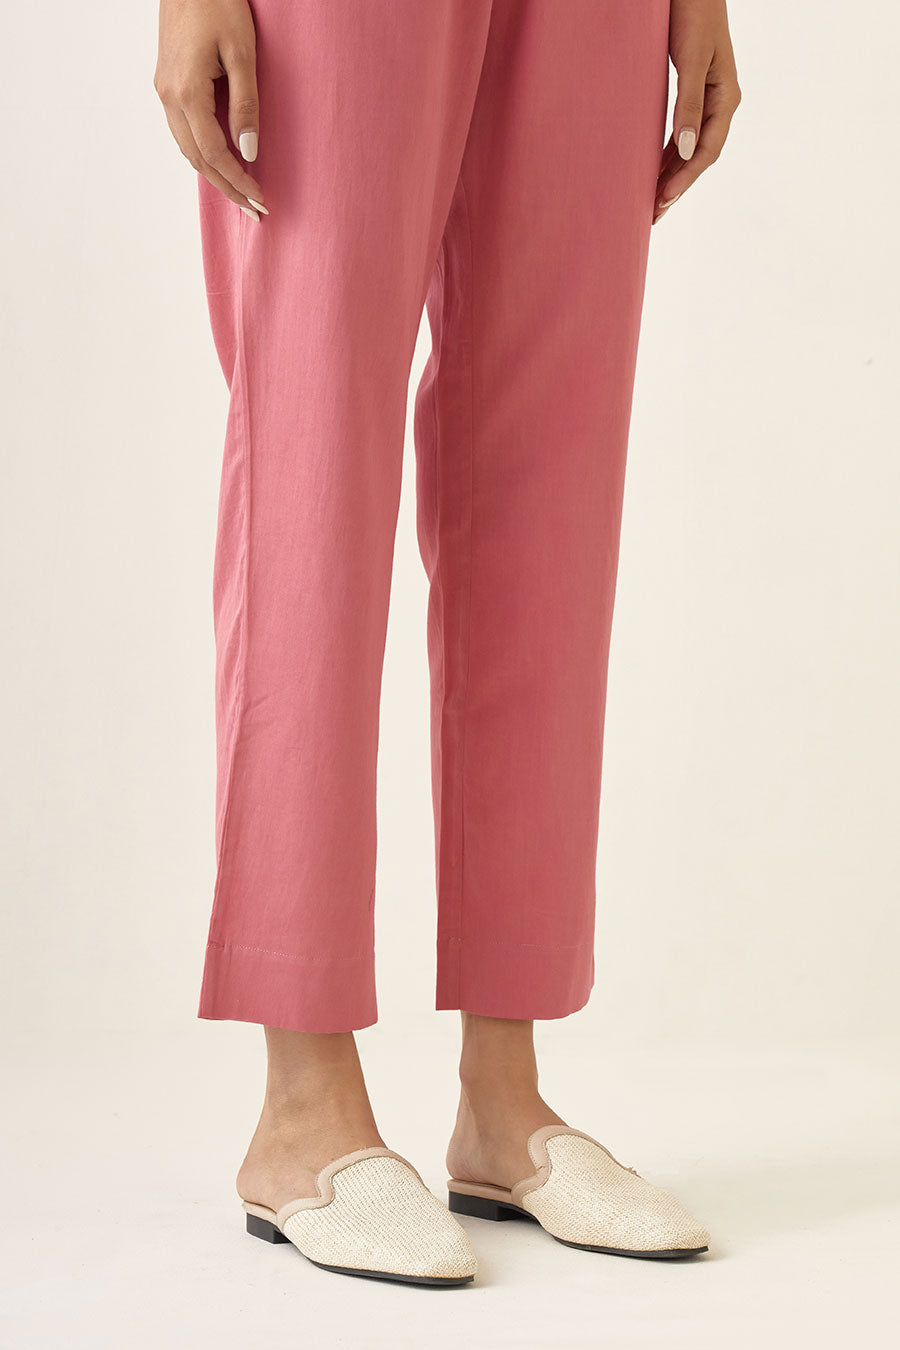 Rose Pink Crop Top with Pleated Pant Co-ord Set